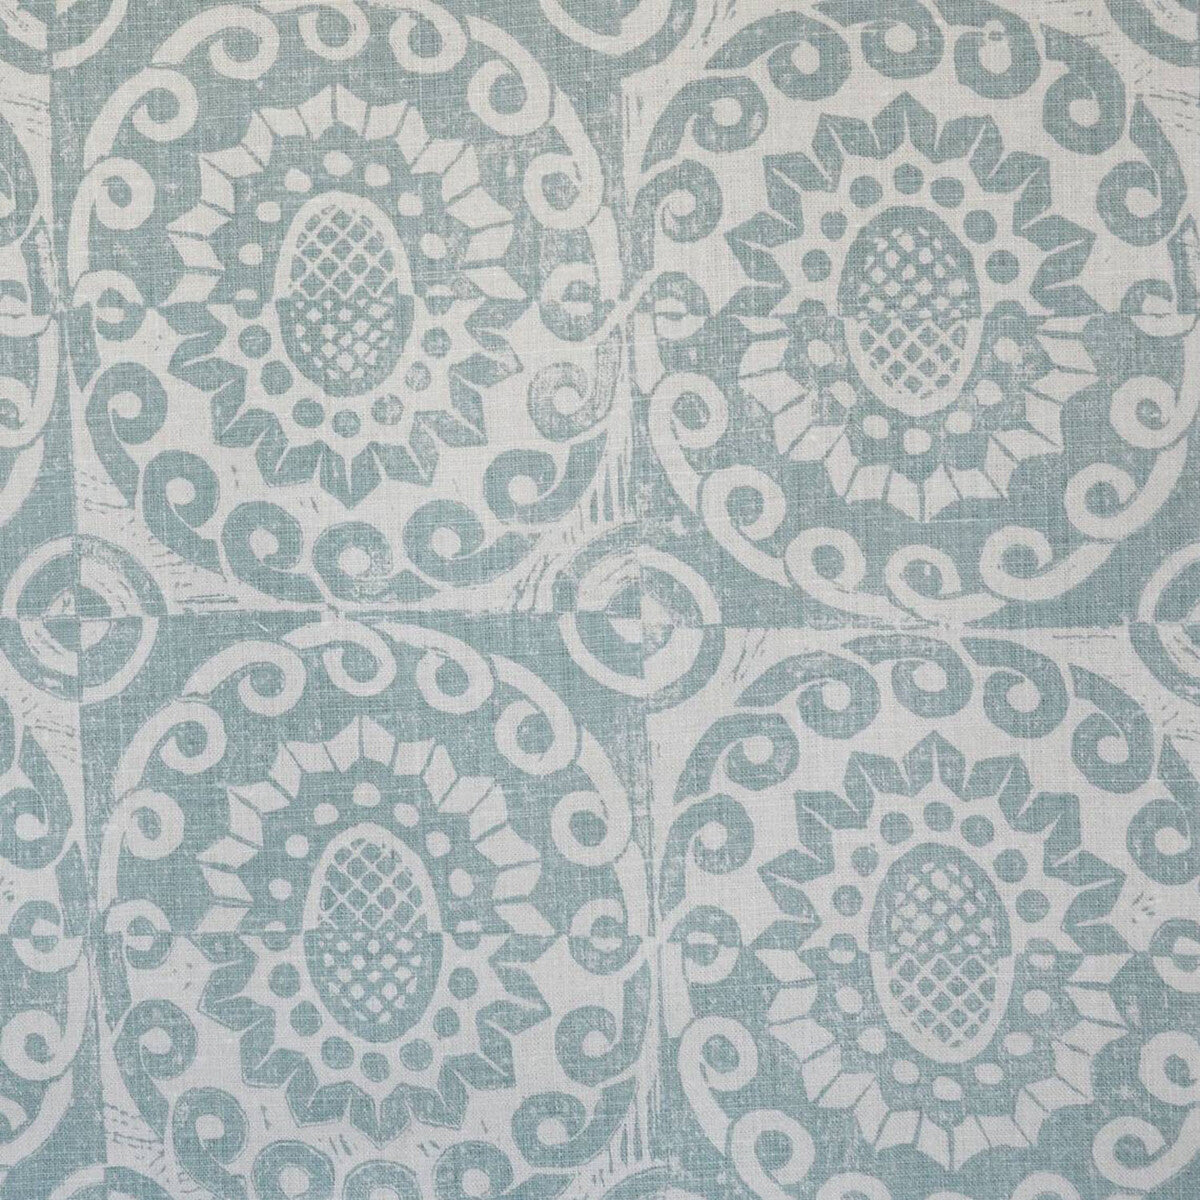 Pineapple On Oatmeal fabric in aqua color - pattern BFC-3628.3.0 - by Lee Jofa in the Blithfield collection